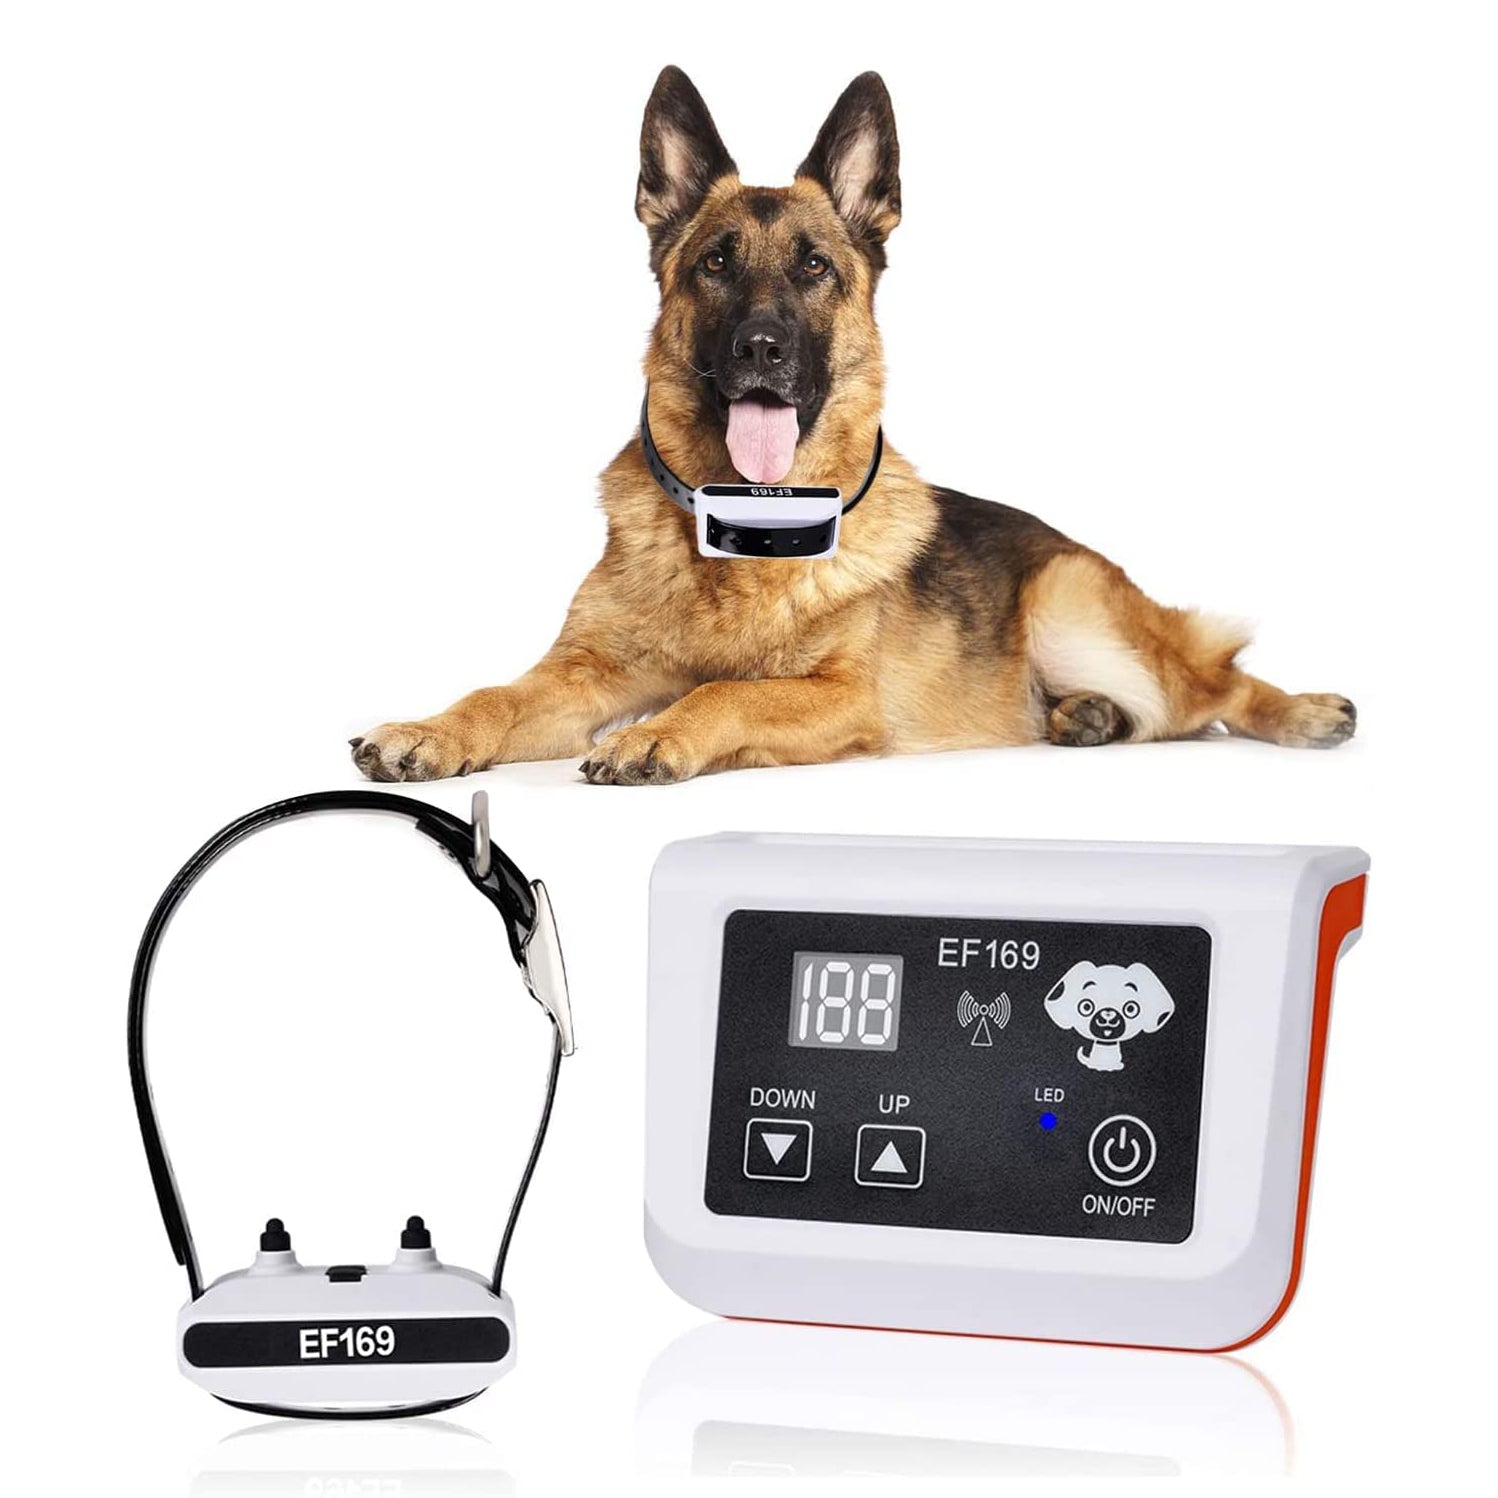 iMeshbean Wireless Dog Fence， Electric Fence System for Stubborn Dog，Wireless Dog Boundary Containment System，Rechargeable Training Collar，Large Signal Range of 65-1640ft (for 2 Dogs)